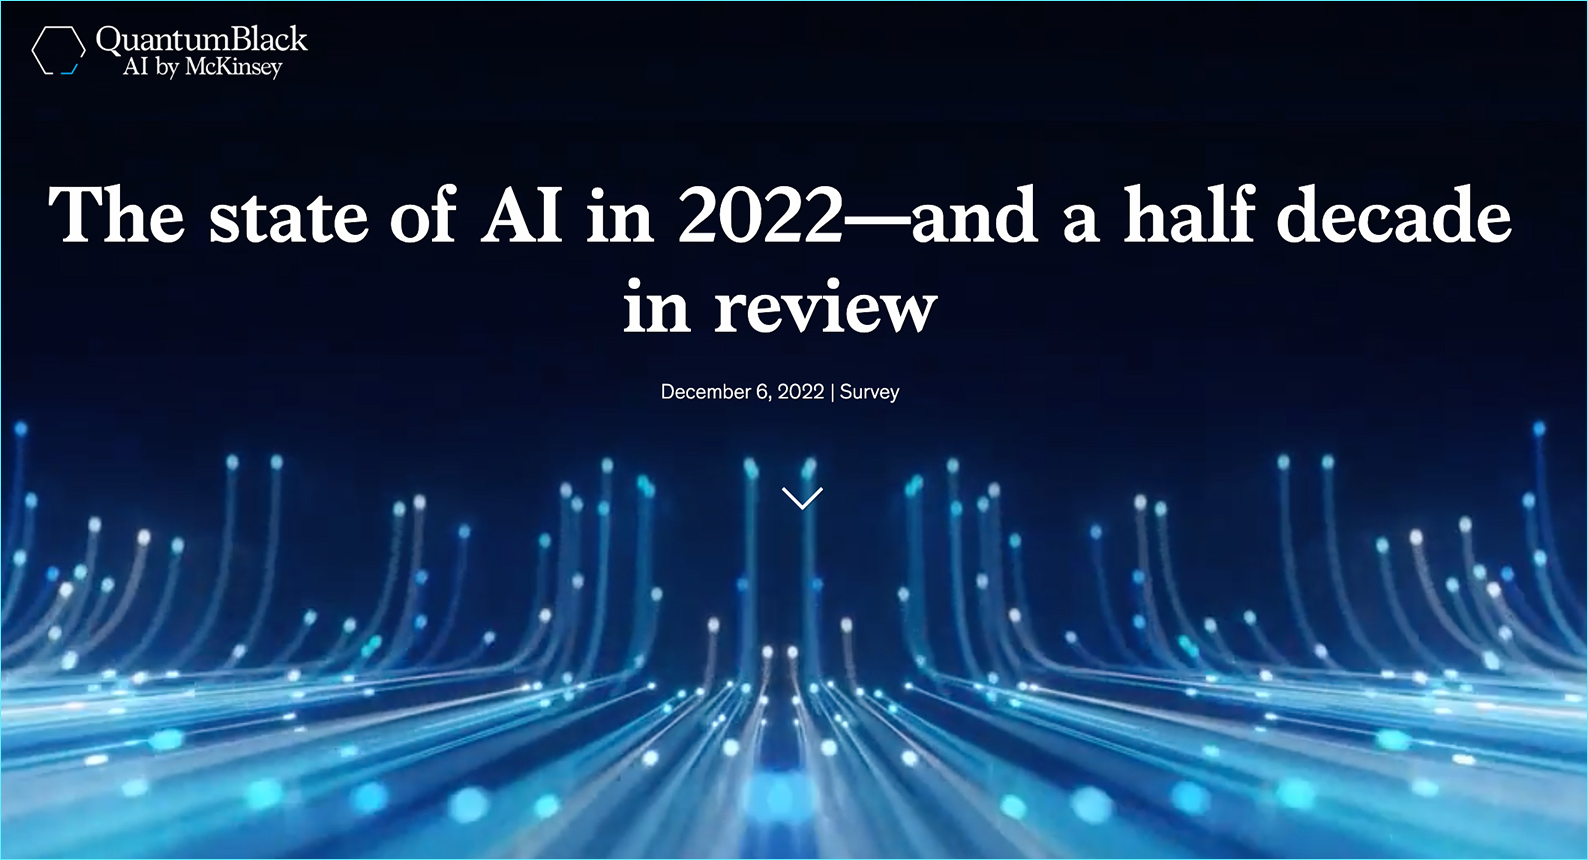 The state of AI in 2022—and a half decade in review